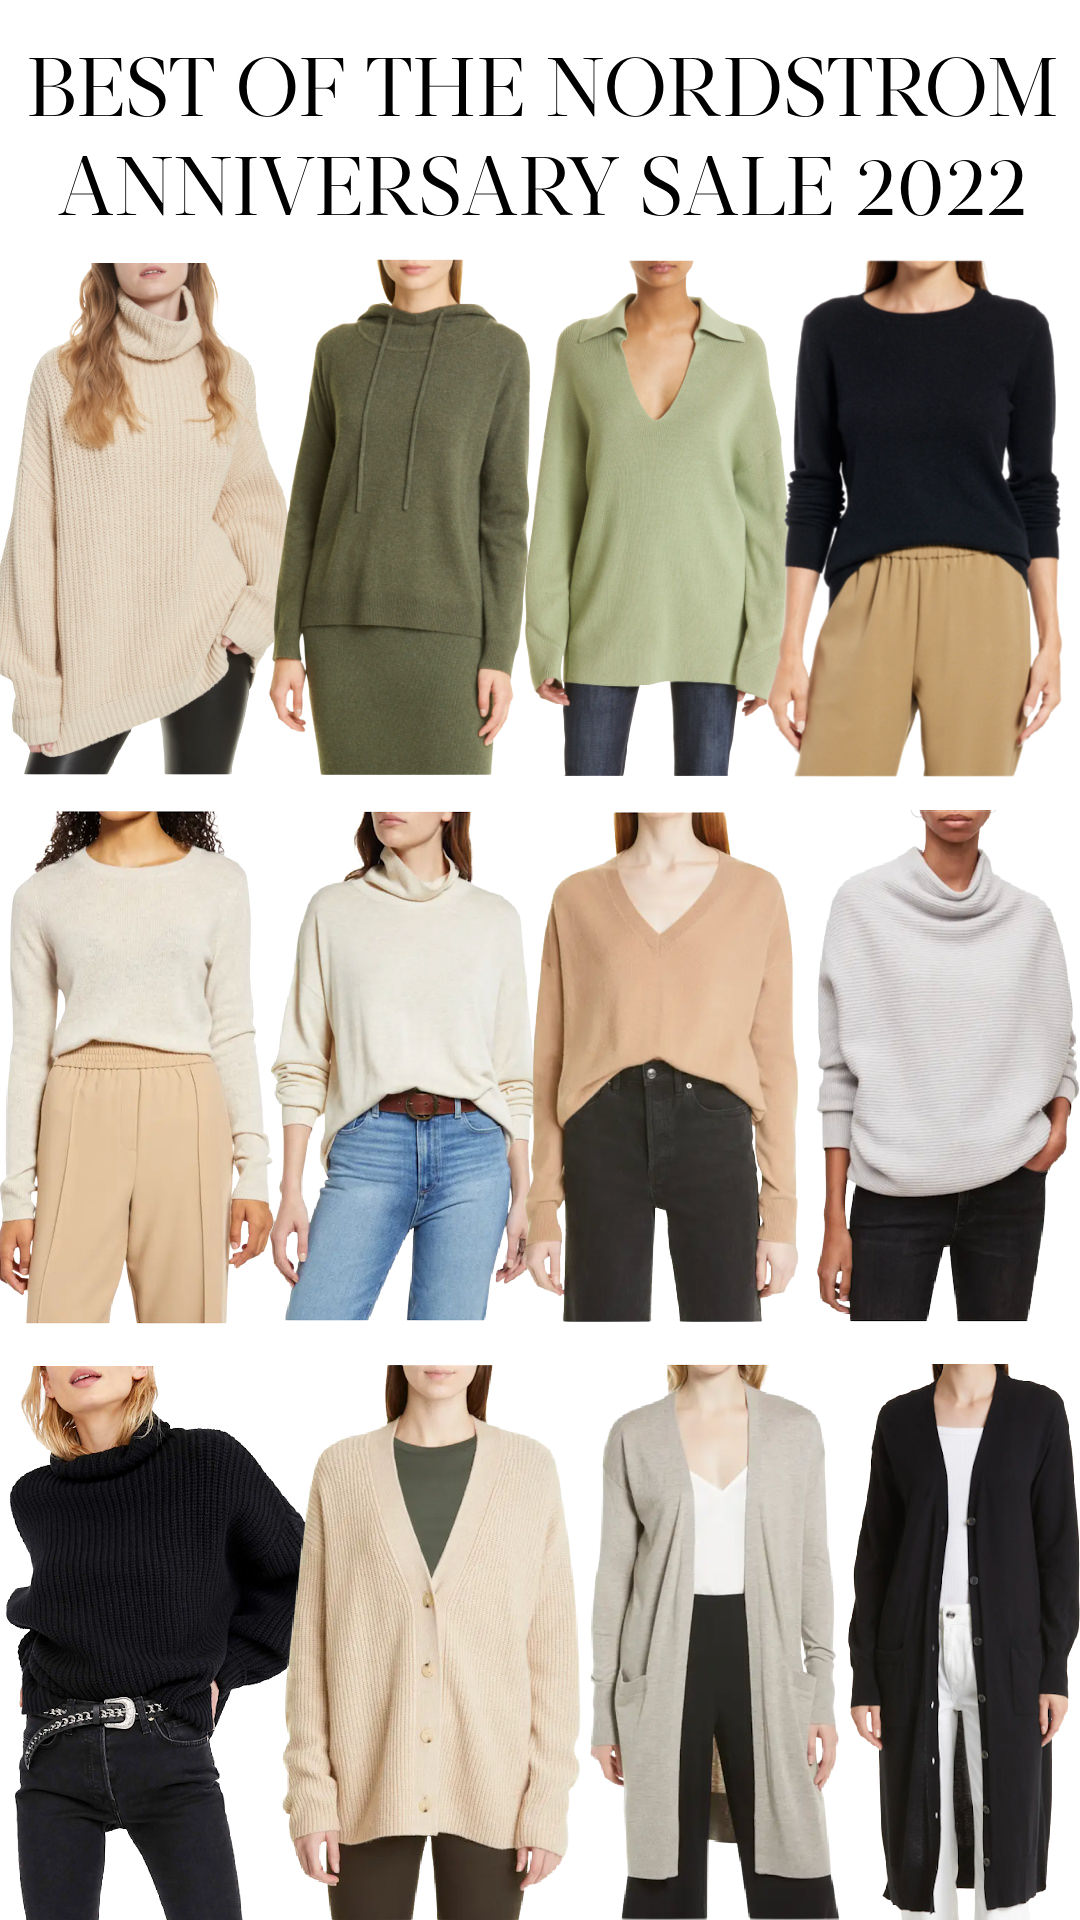 My Picks from the Nordstrom Anniversary Sale 2022